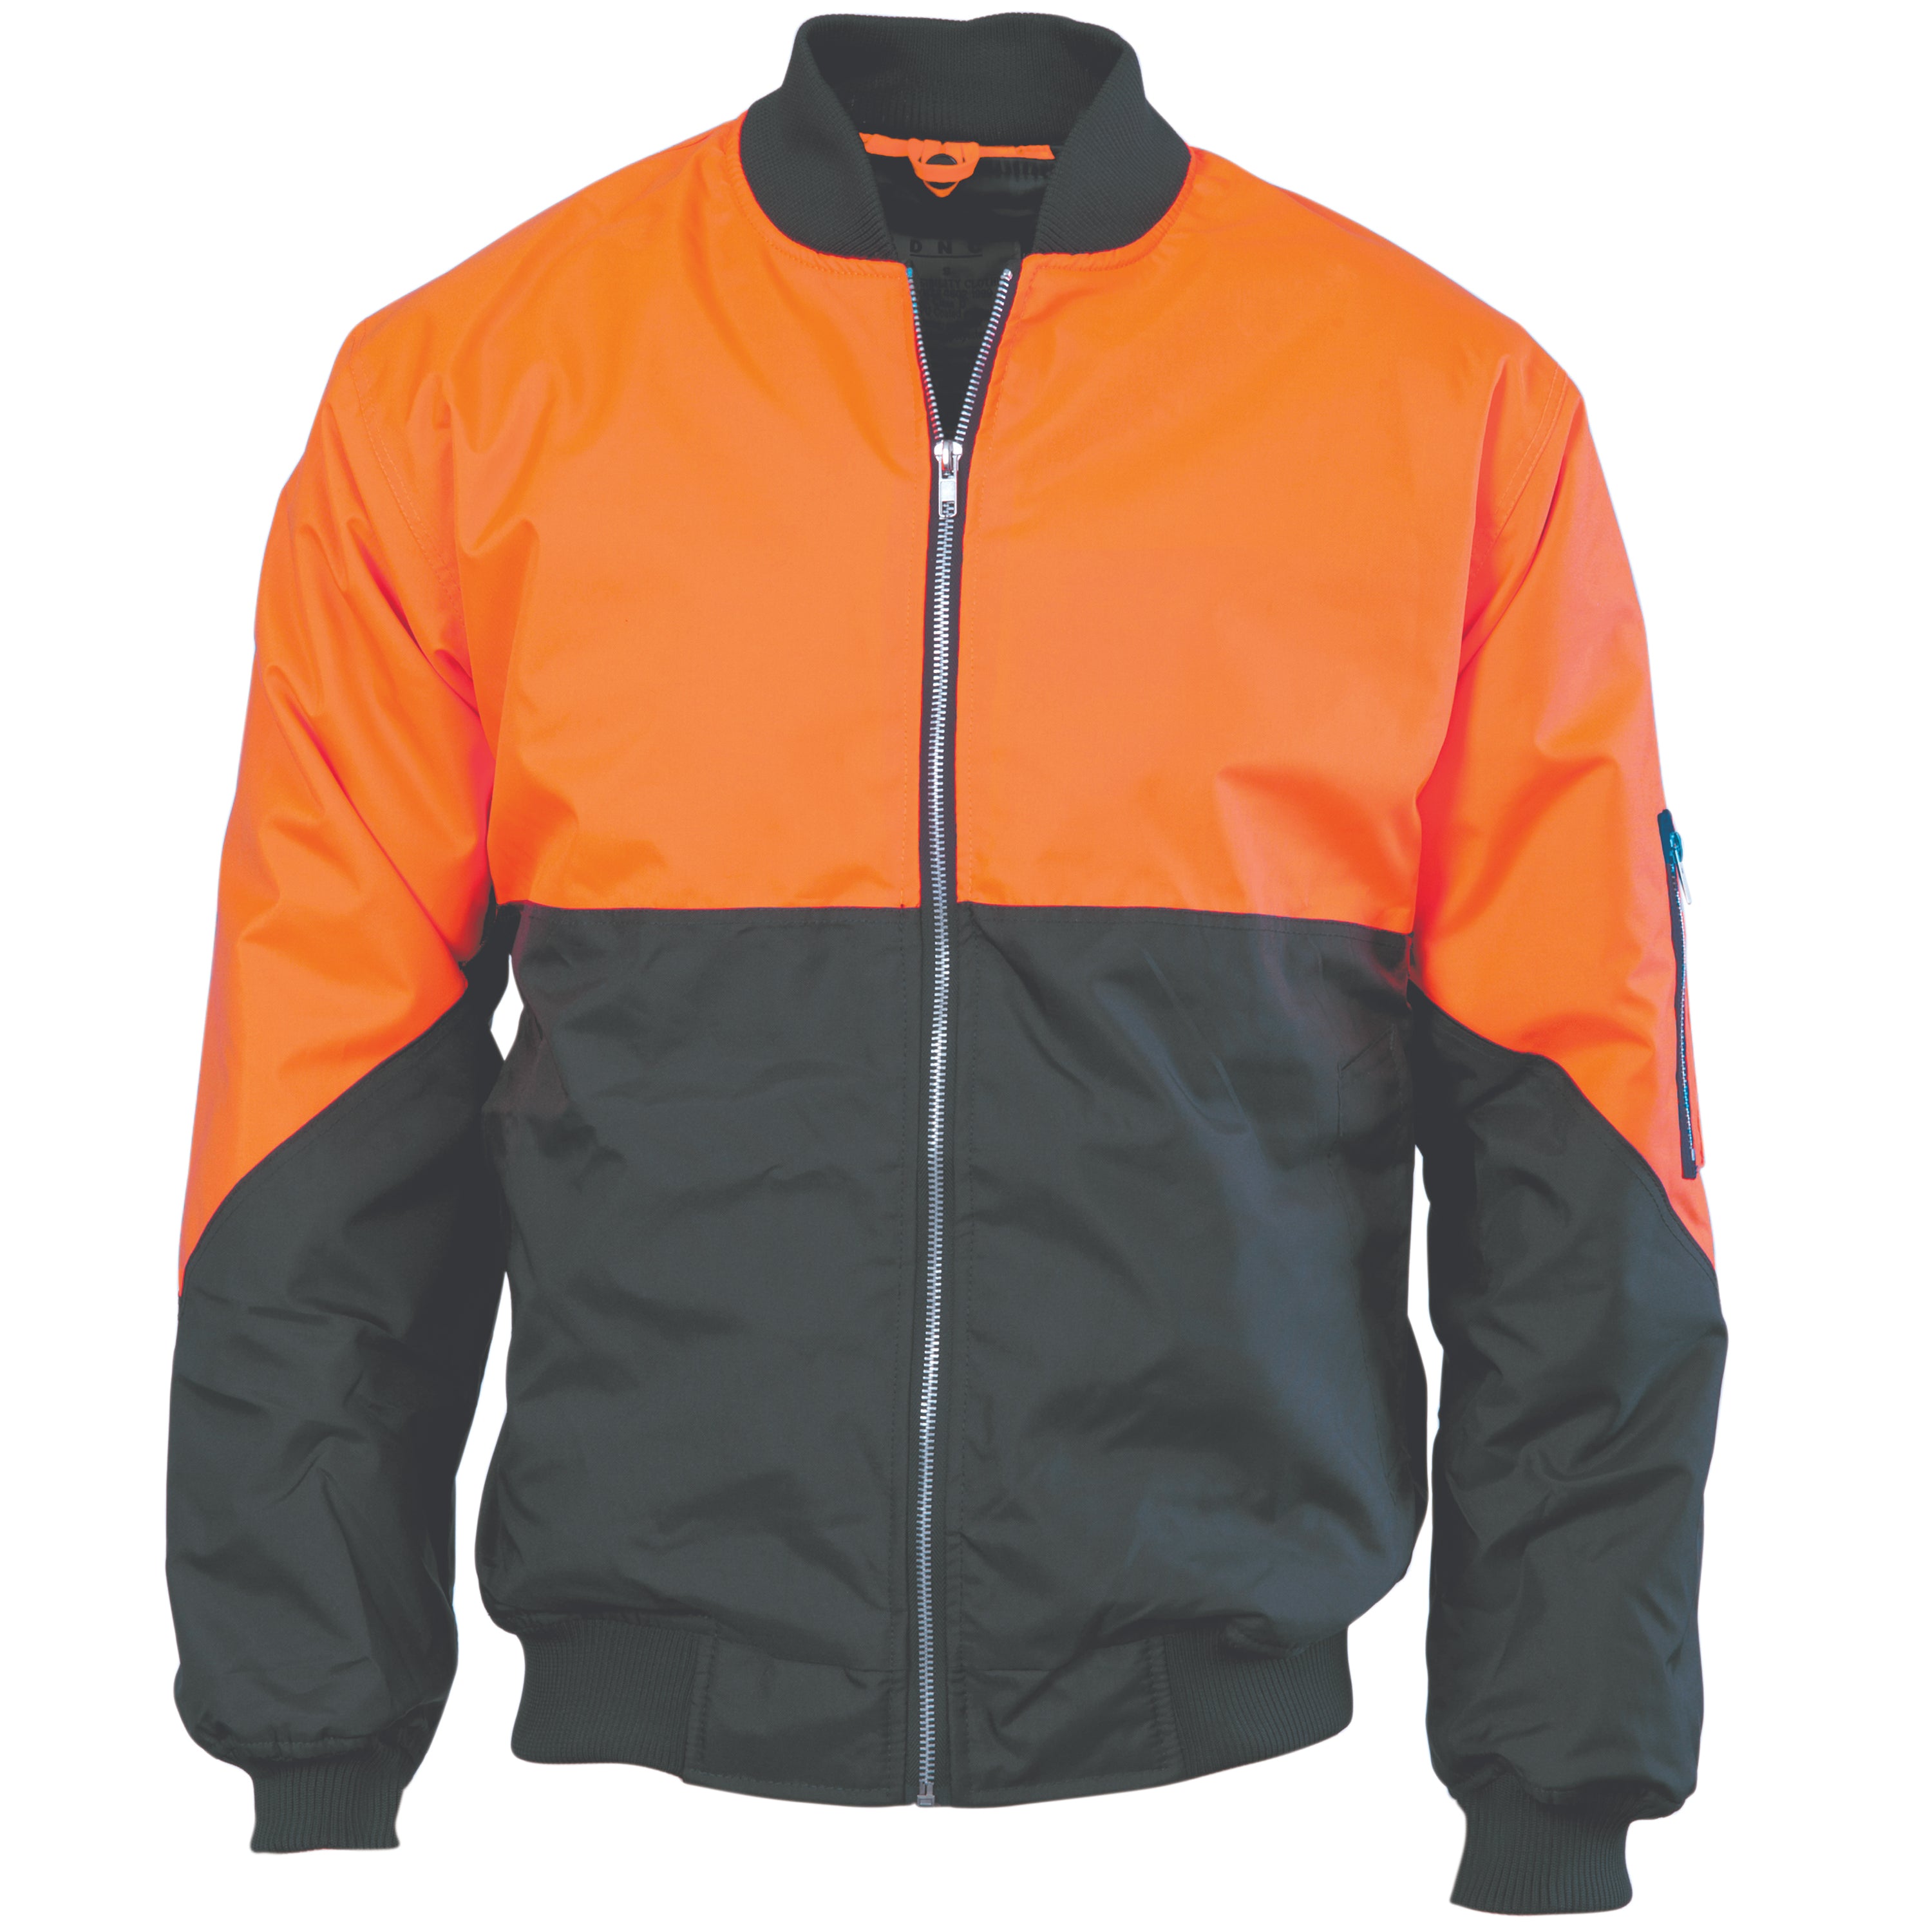 DNC 3861 HiVis Two Tone Flying Jacket